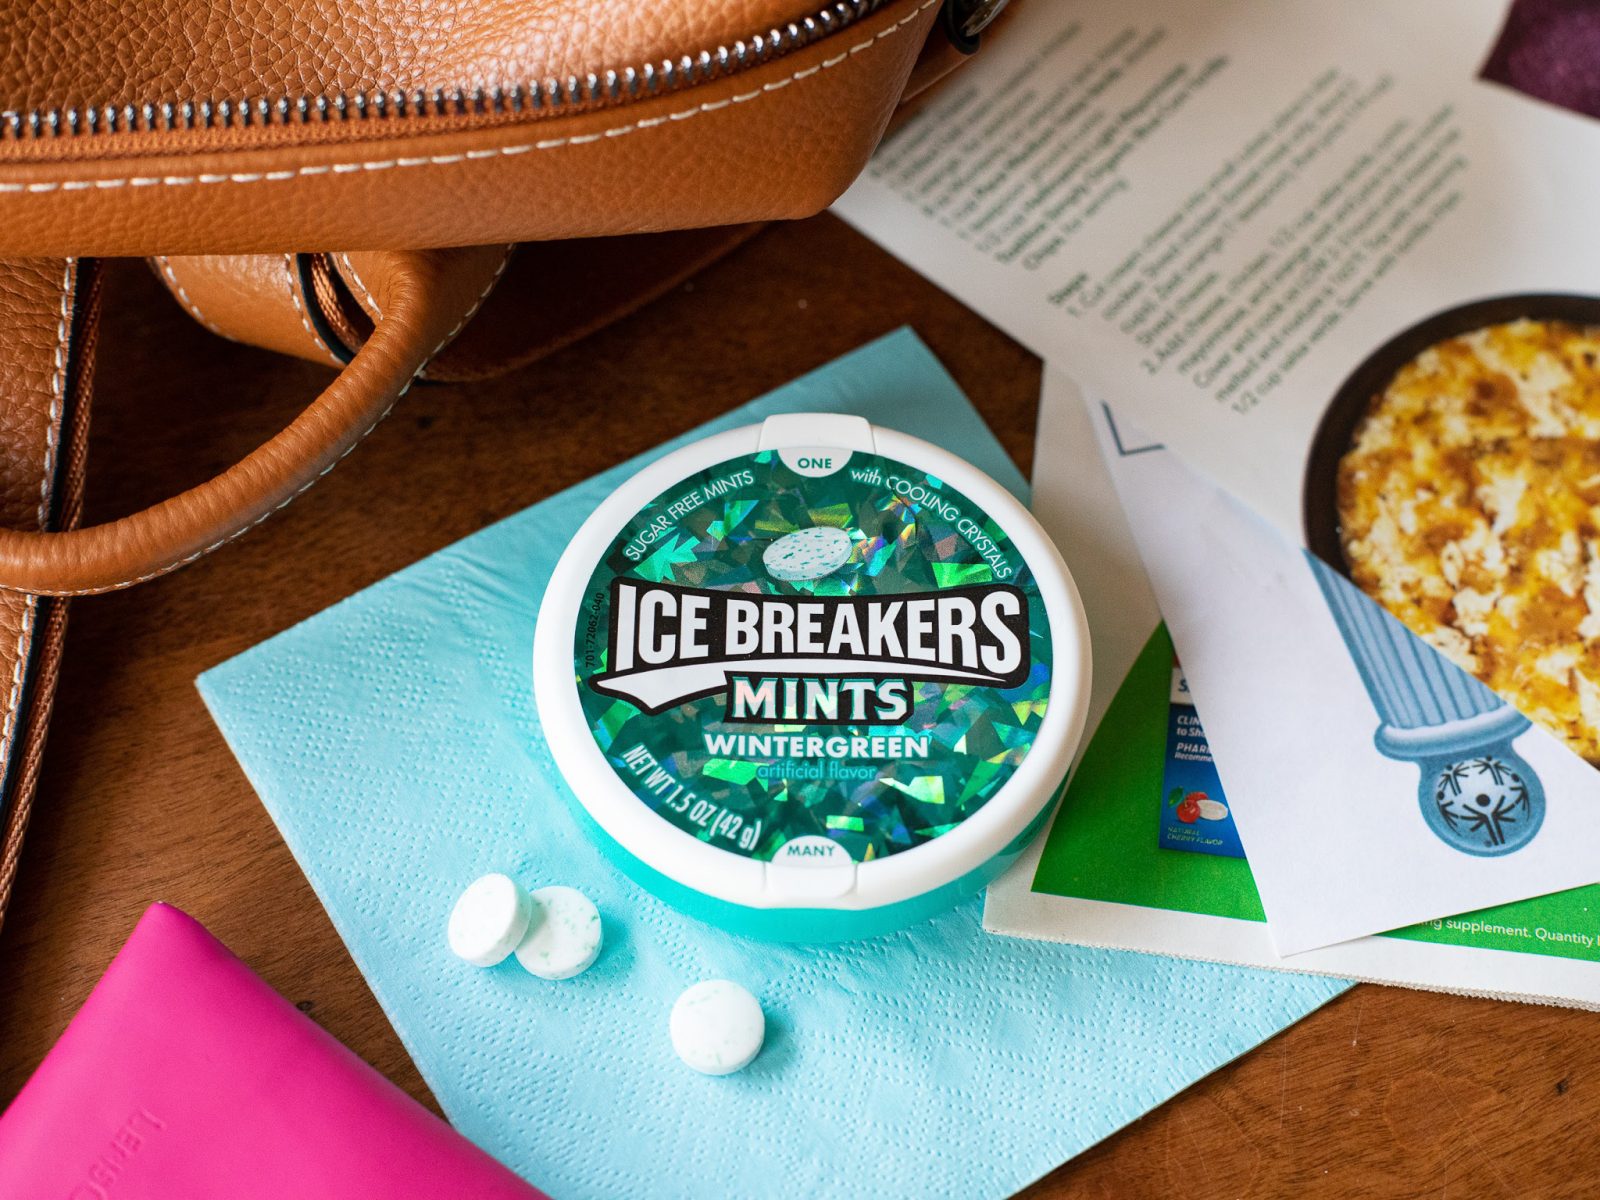 Get Ice Breakers Mints For Just $1.99 At Kroger